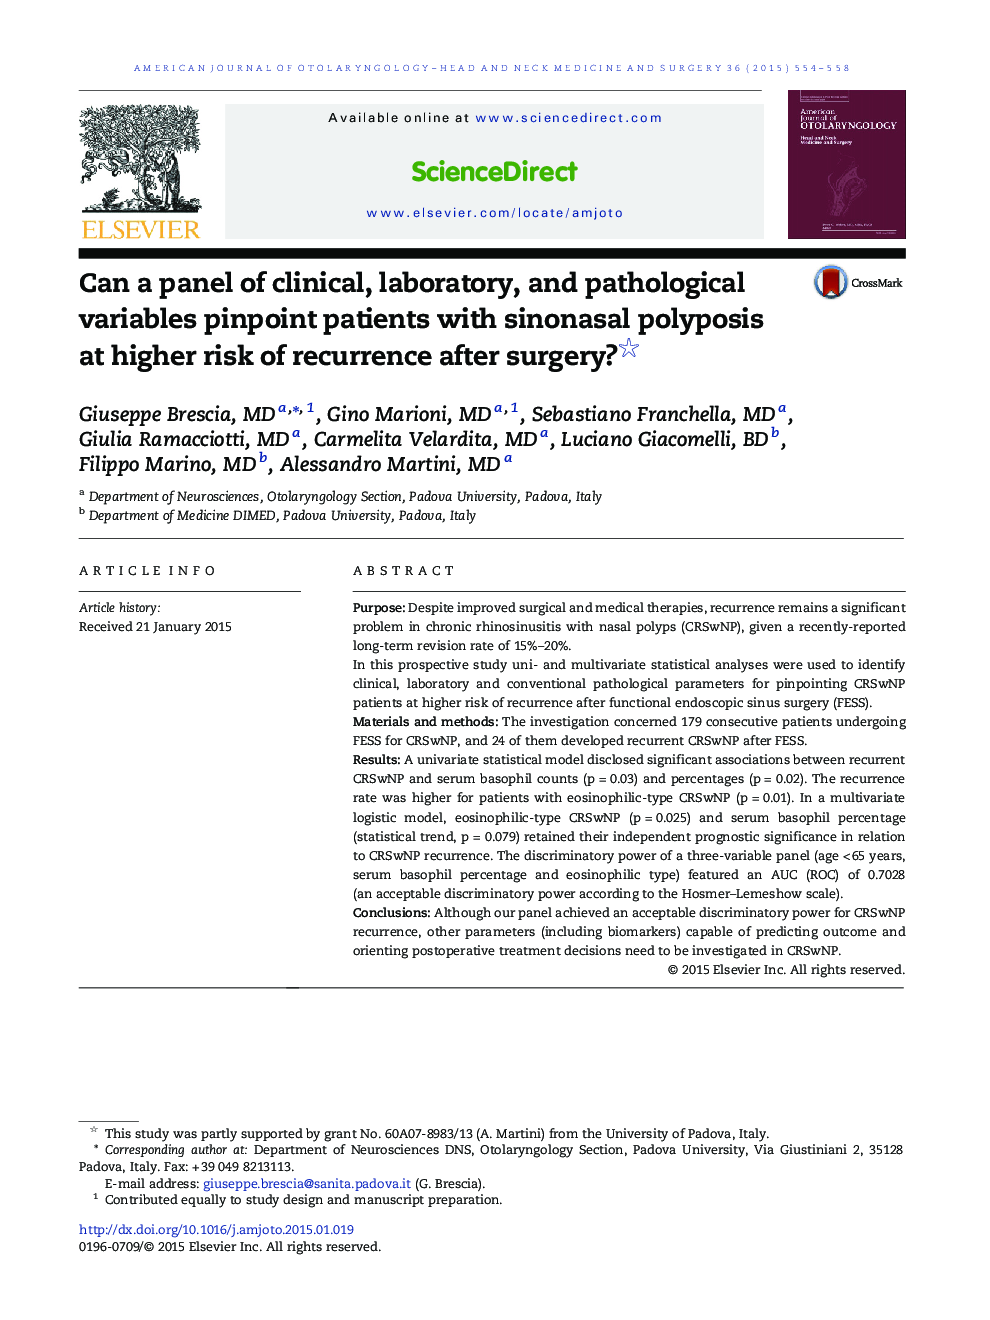 Can a panel of clinical, laboratory, and pathological variables pinpoint patients with sinonasal polyposis at higher risk of recurrence after surgery? 